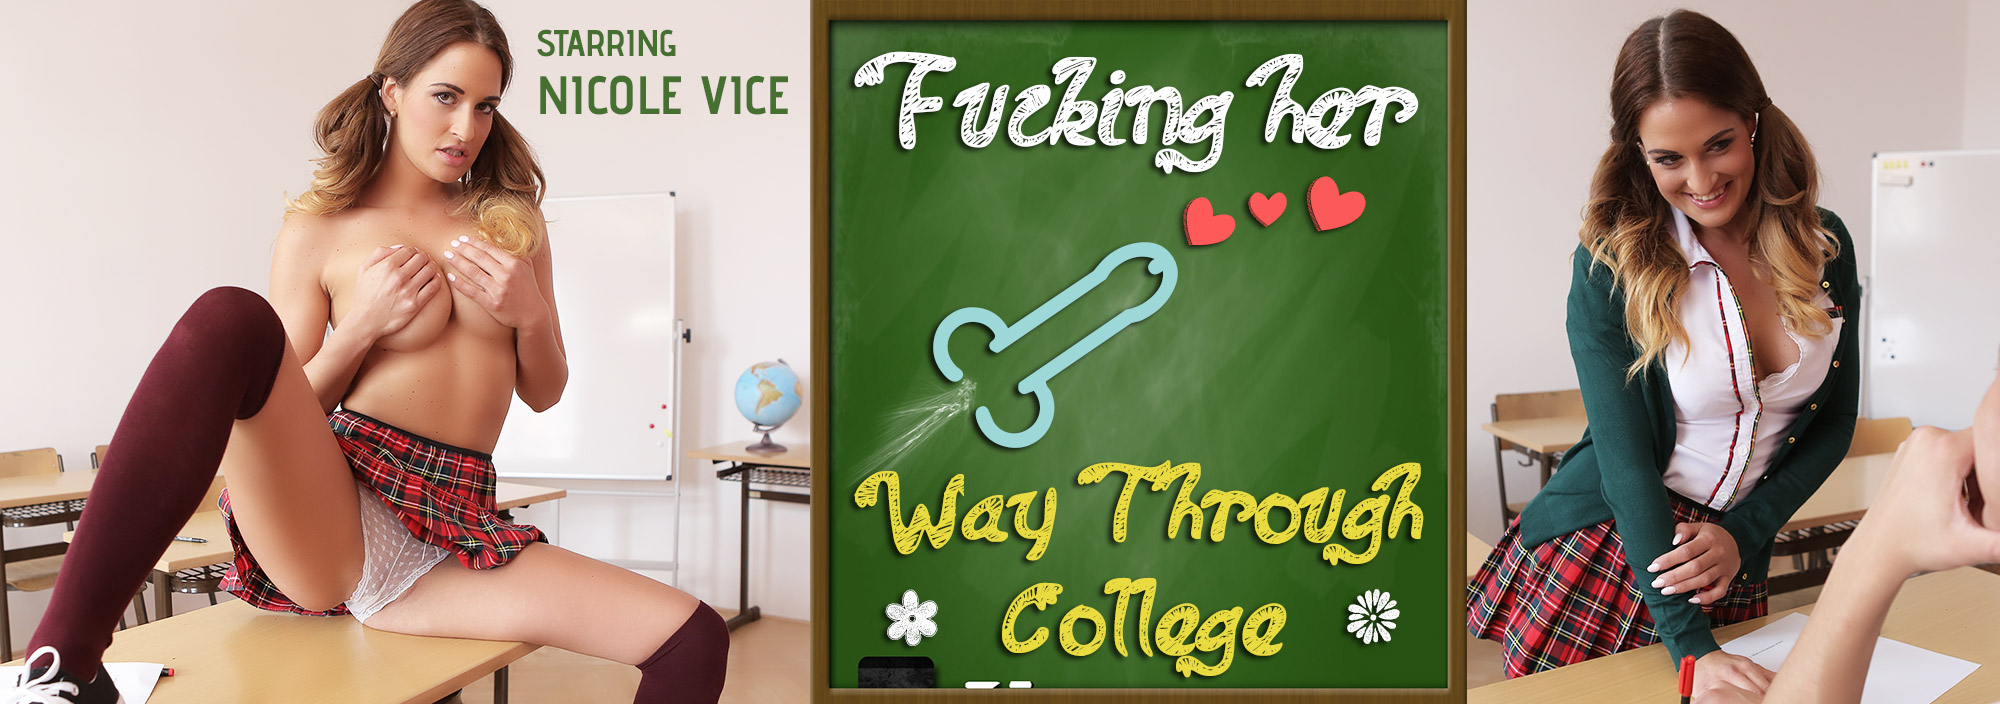 F**ing her way through college with Nicole Vice  Slideshow